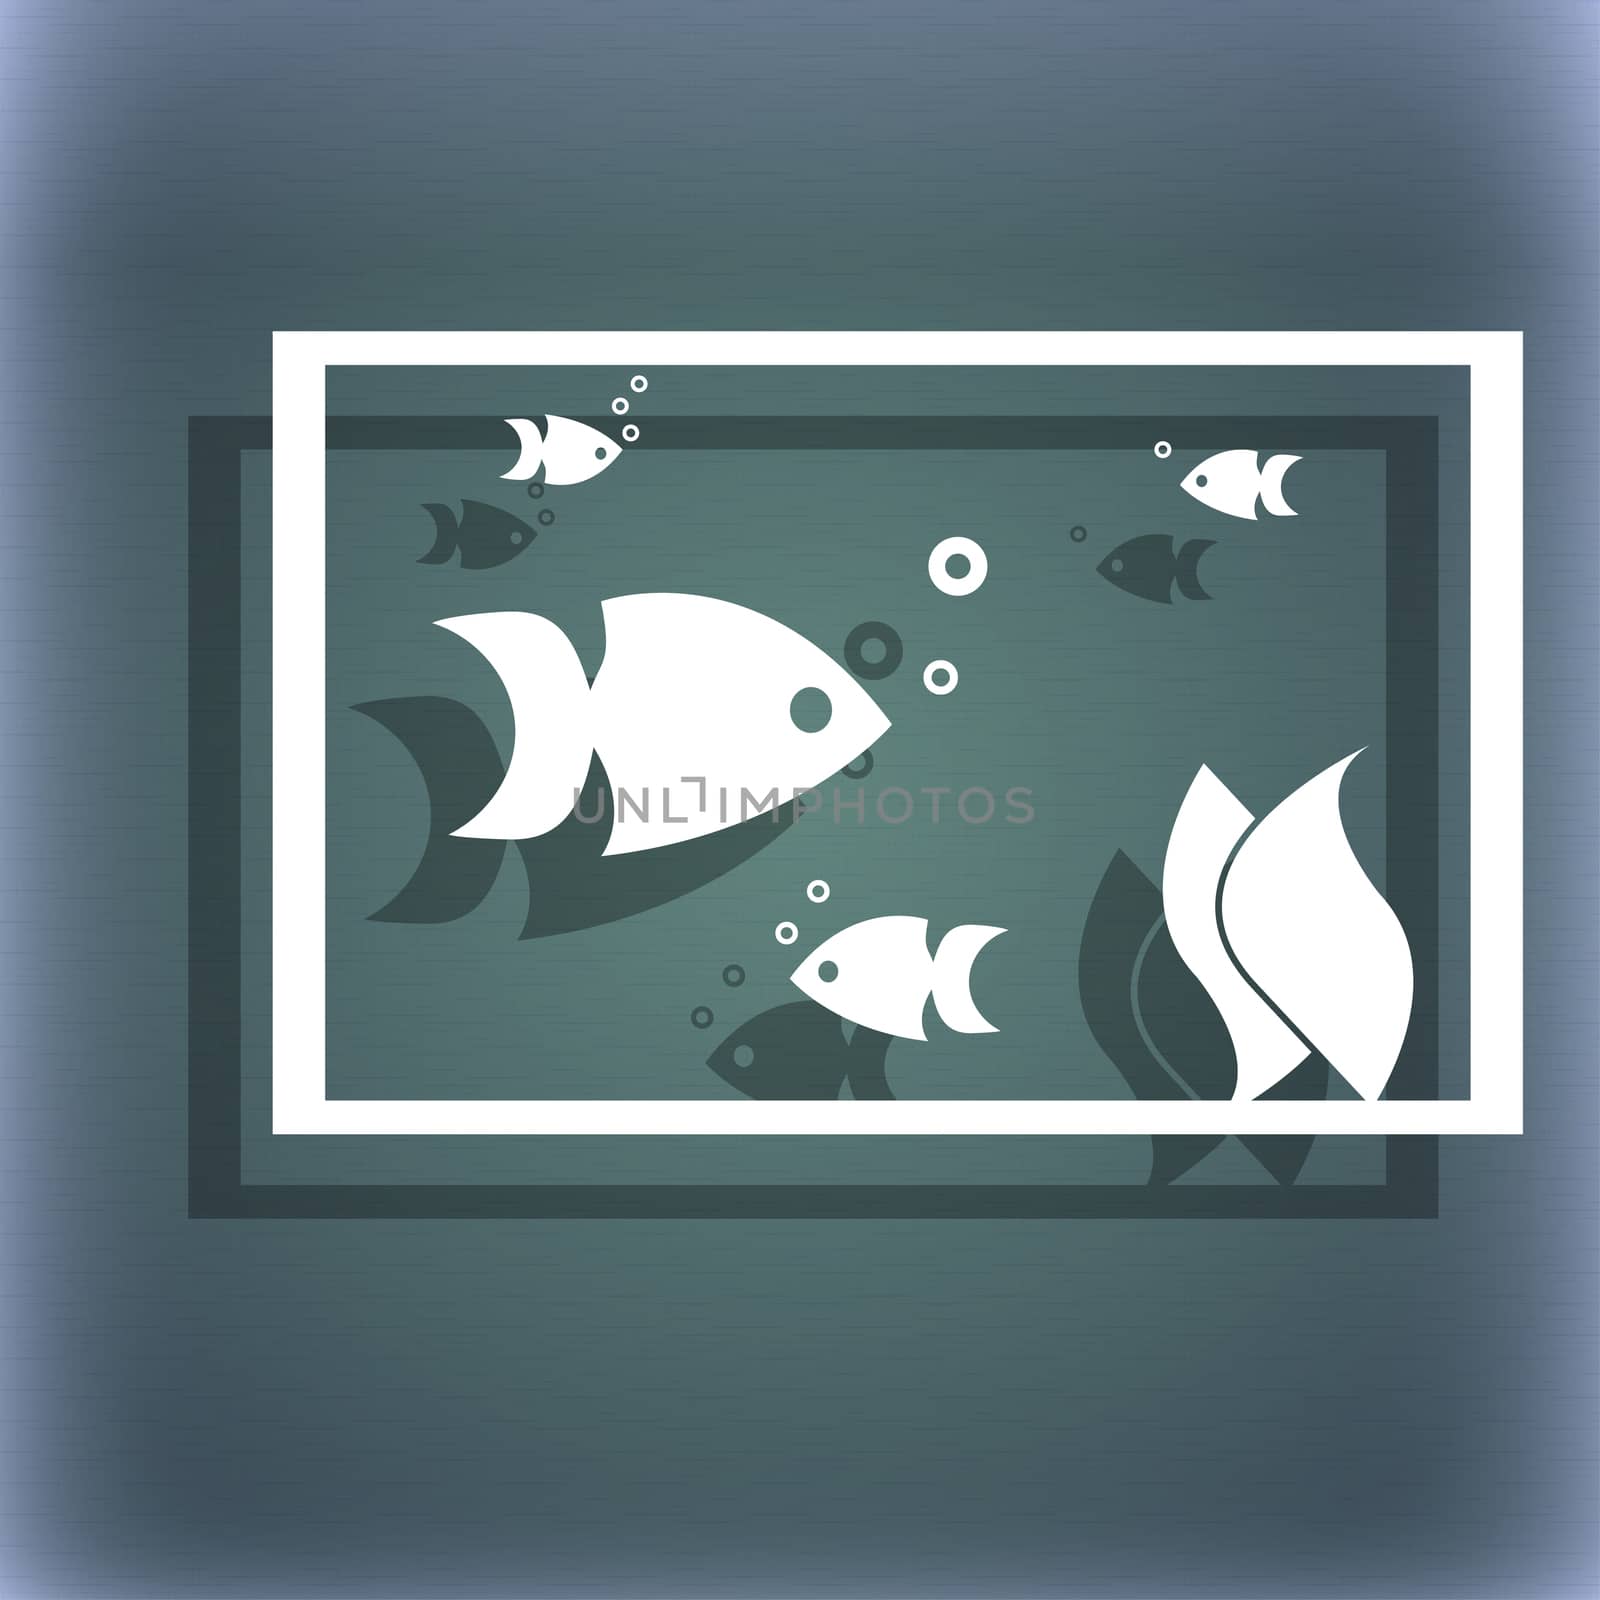 Aquarium, Fish in water icon sign. On the blue-green abstract background with shadow and space for your text. illustration